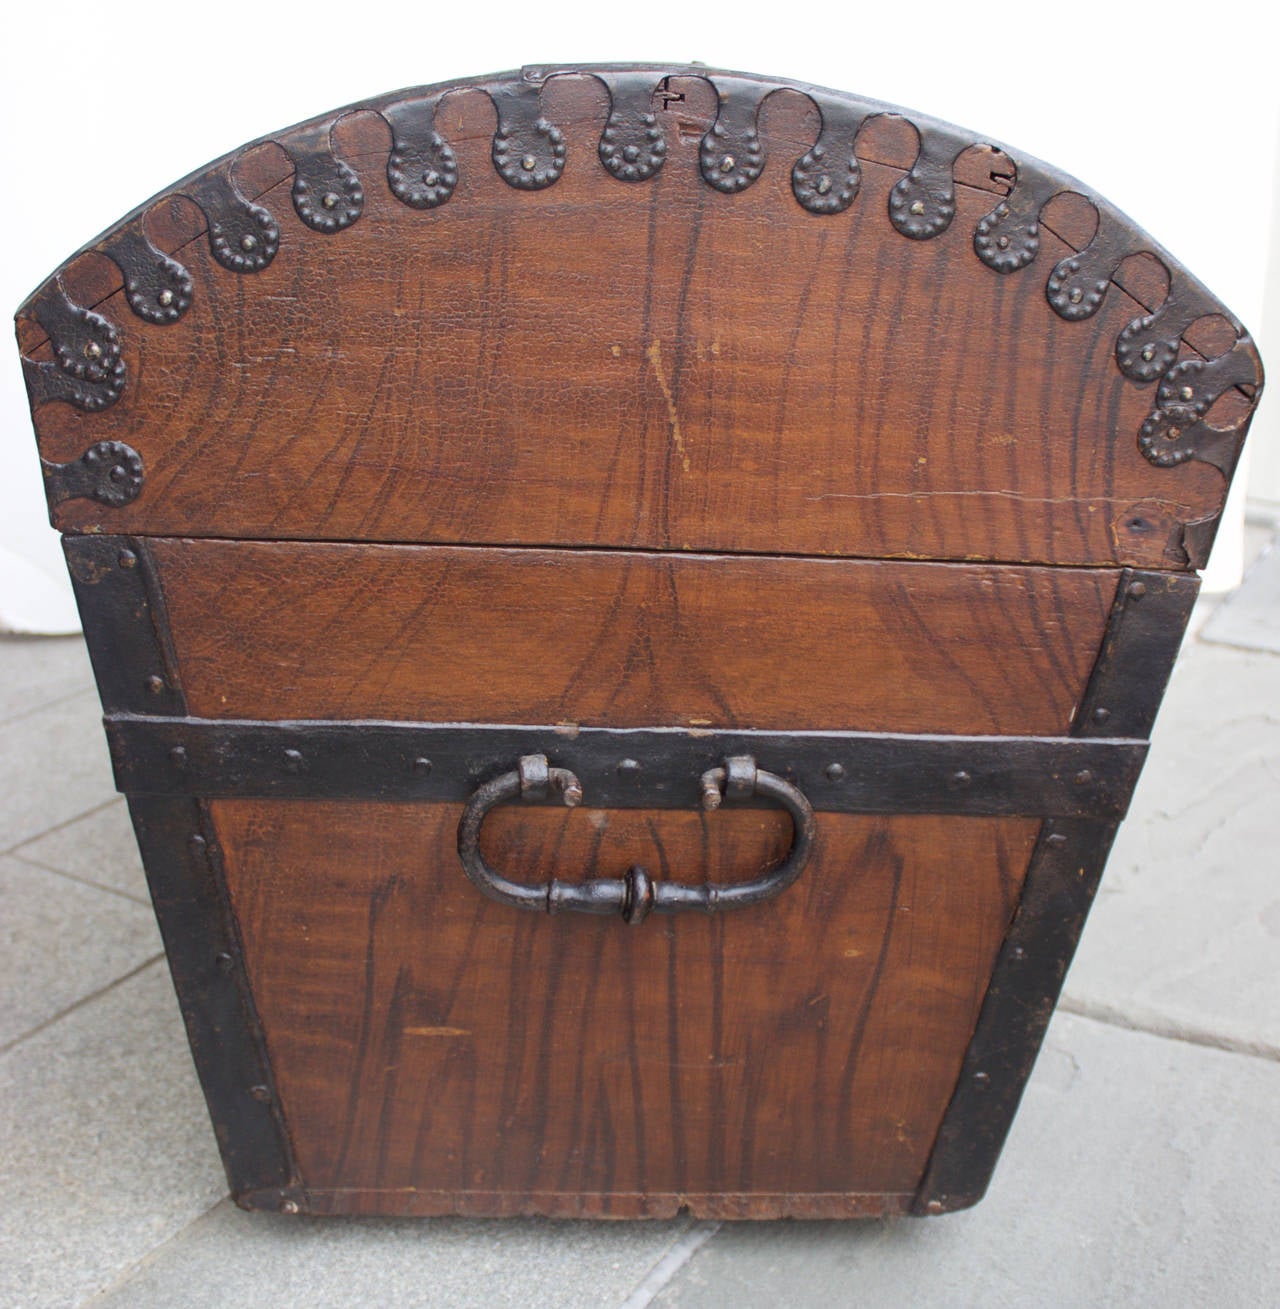 Rare traveling trunk from that period which has a curved top to provide a greater solidity as it was used to transport all personal belonging during often long 